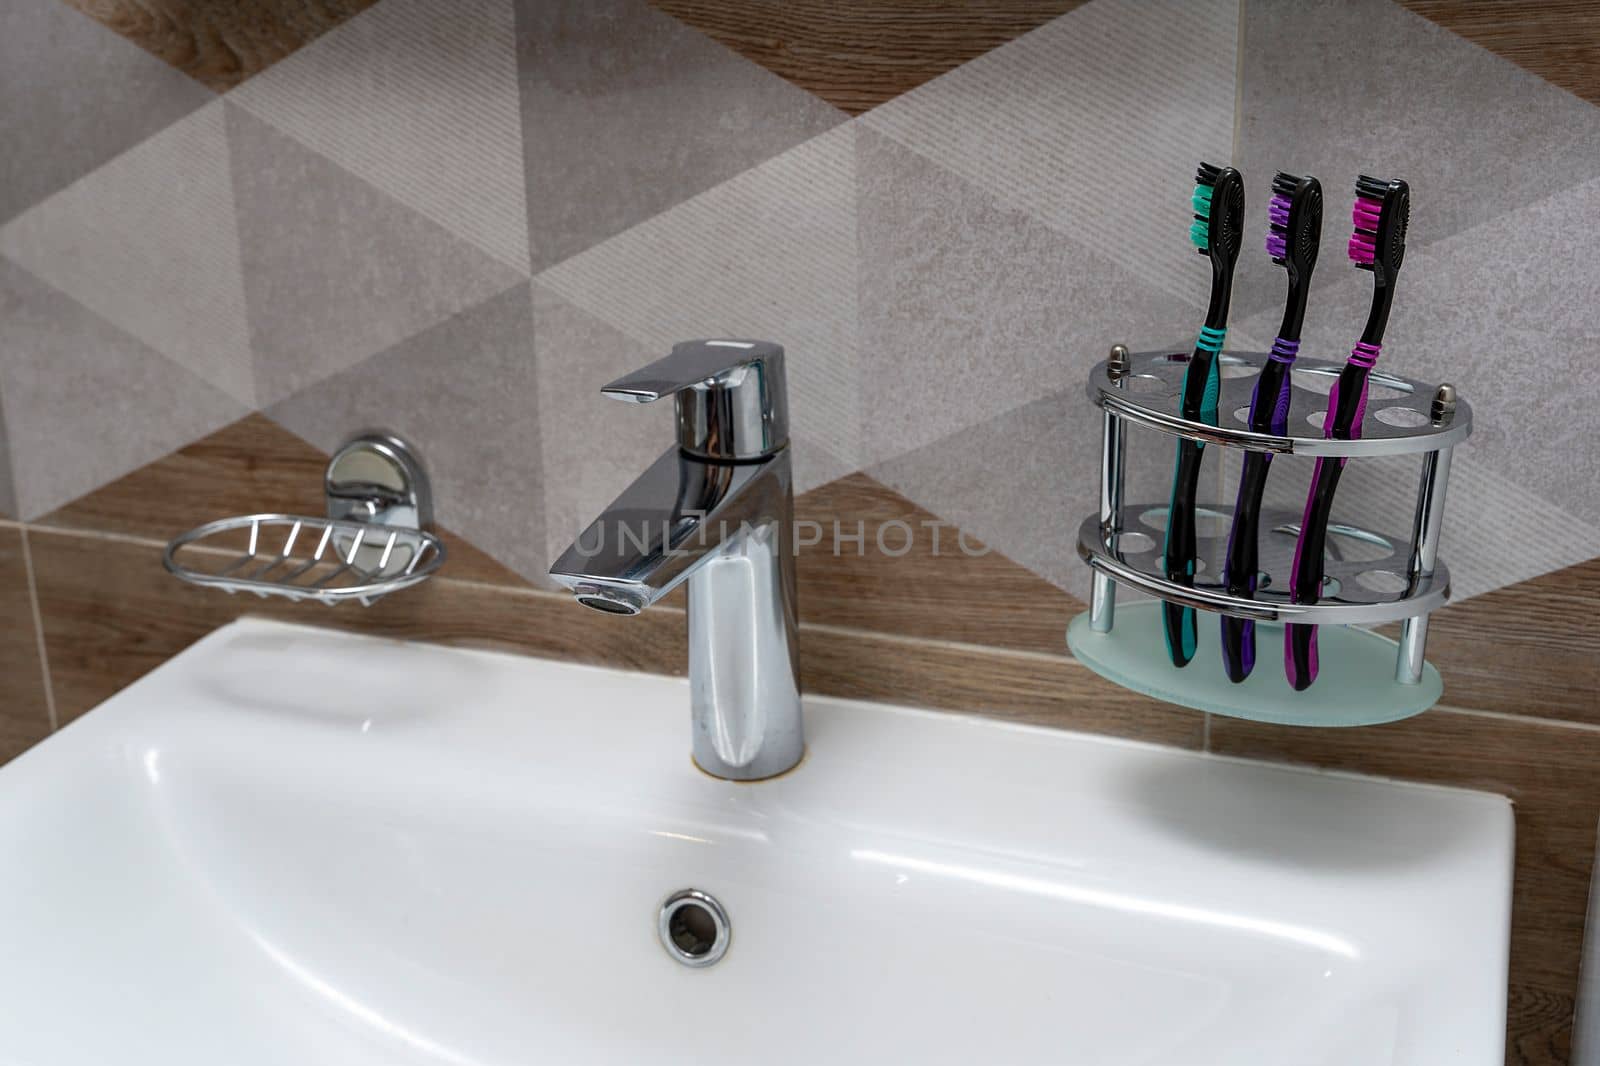 toothbrushes stand on a special stand in the bathroom interior. a sink, a soap dish and a modern mixer are visible. products for daily hygiene